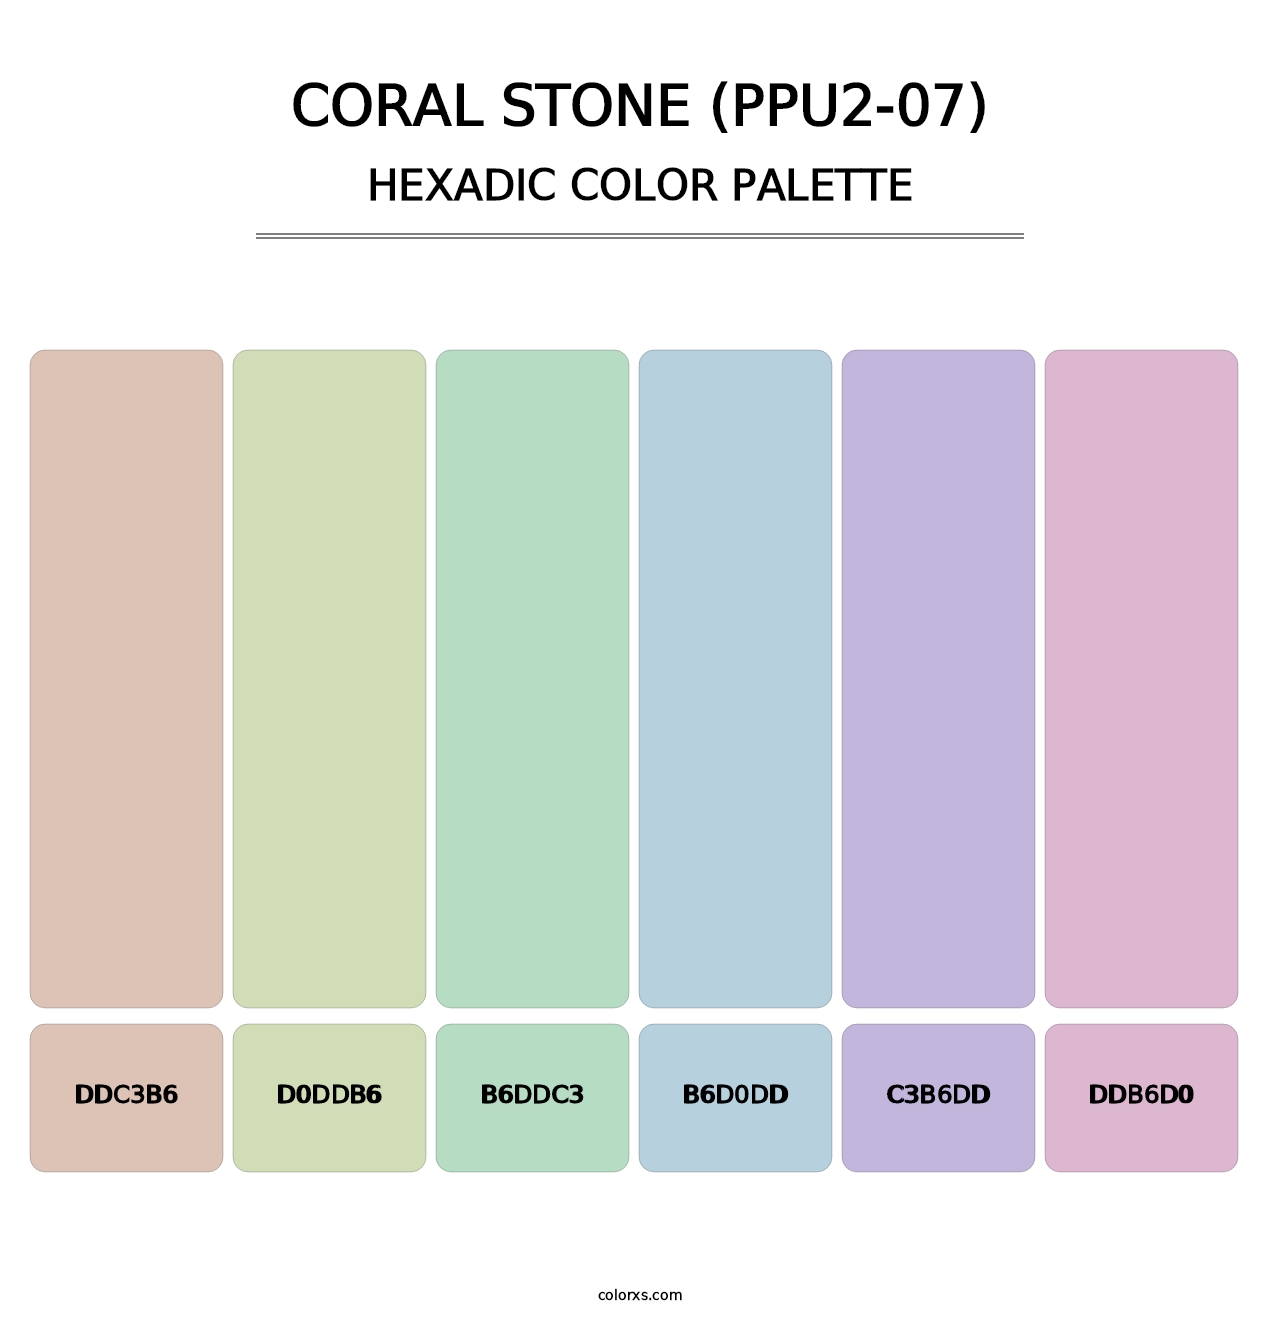 Coral Stone (PPU2-07) - Hexadic Color Palette